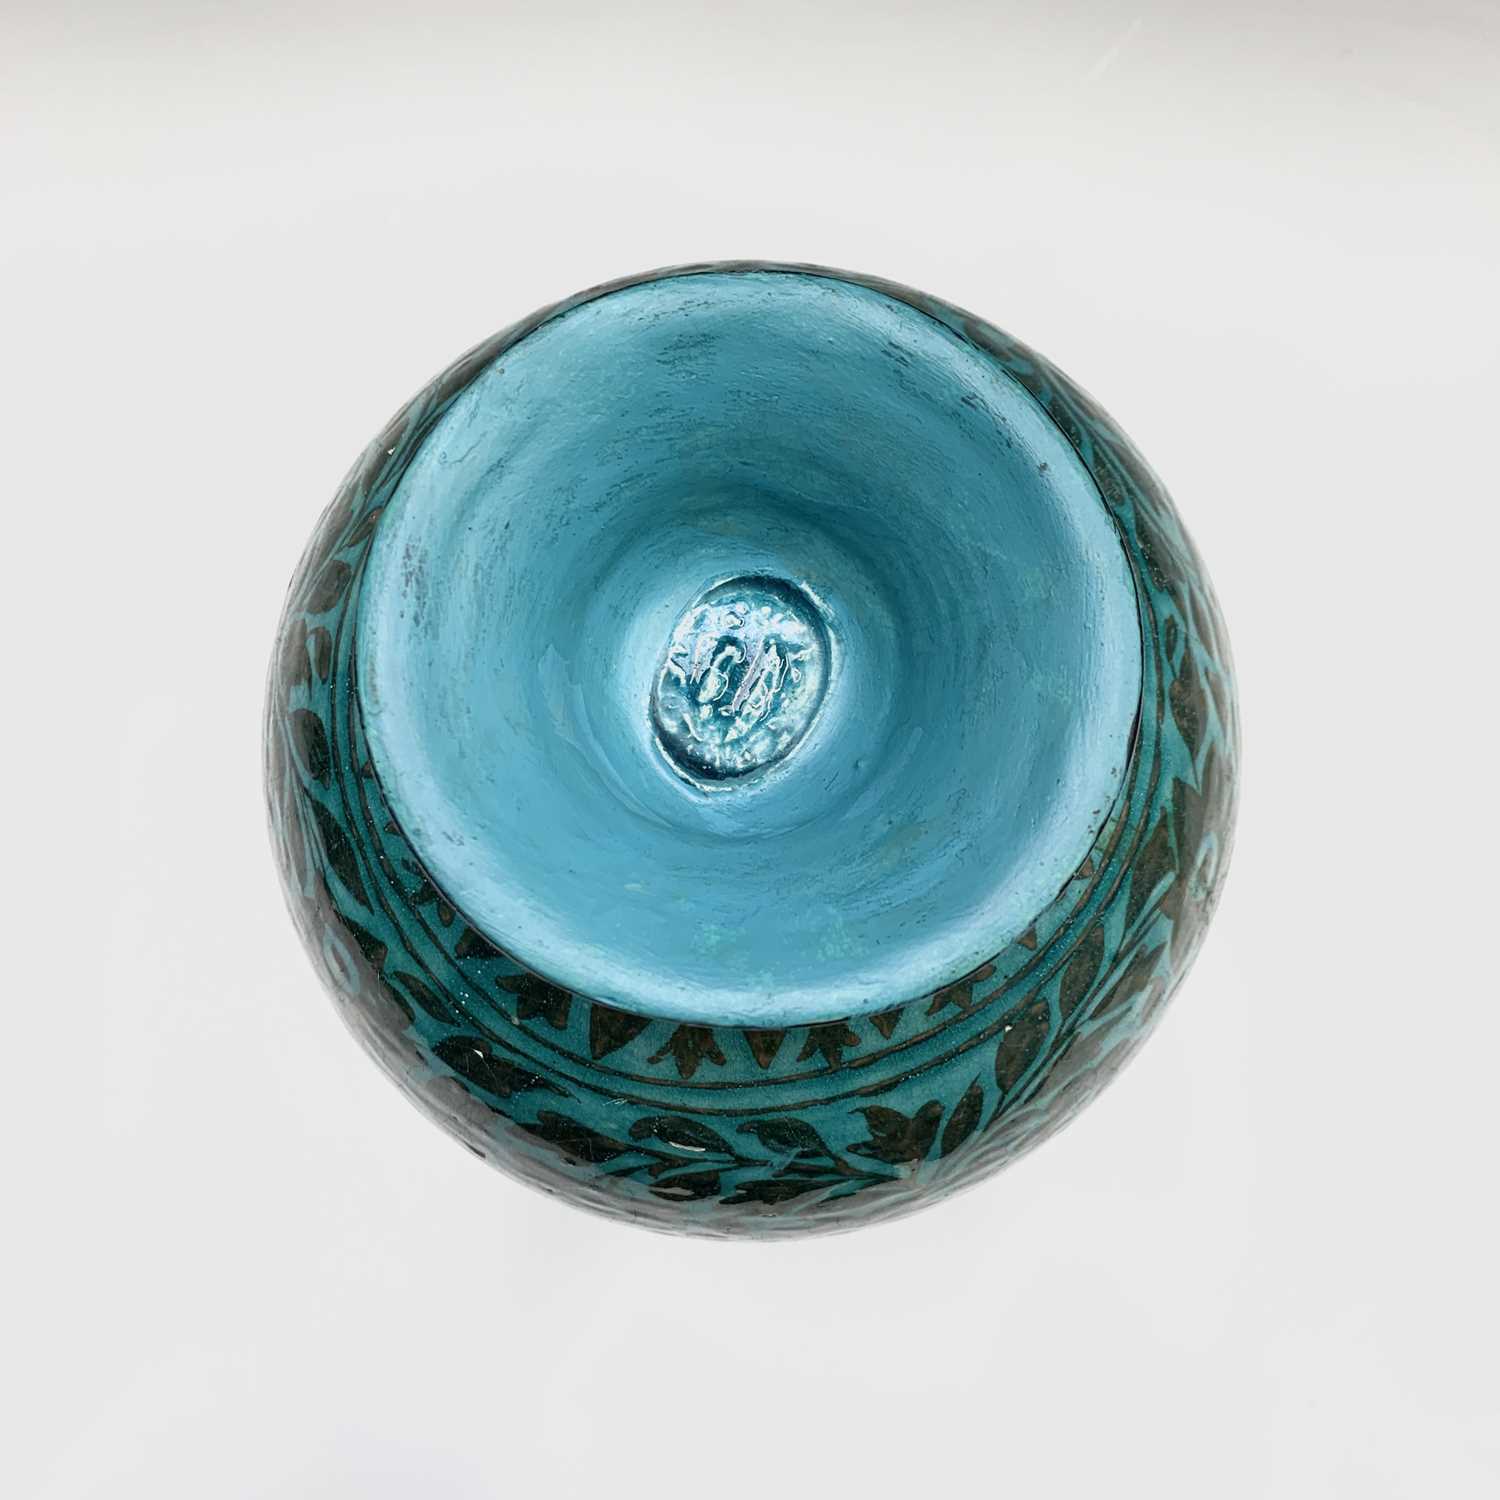 A Persian pottery bottle vase, the turquoise ground with scrolling leafy vines and flowerheads, - Image 3 of 4